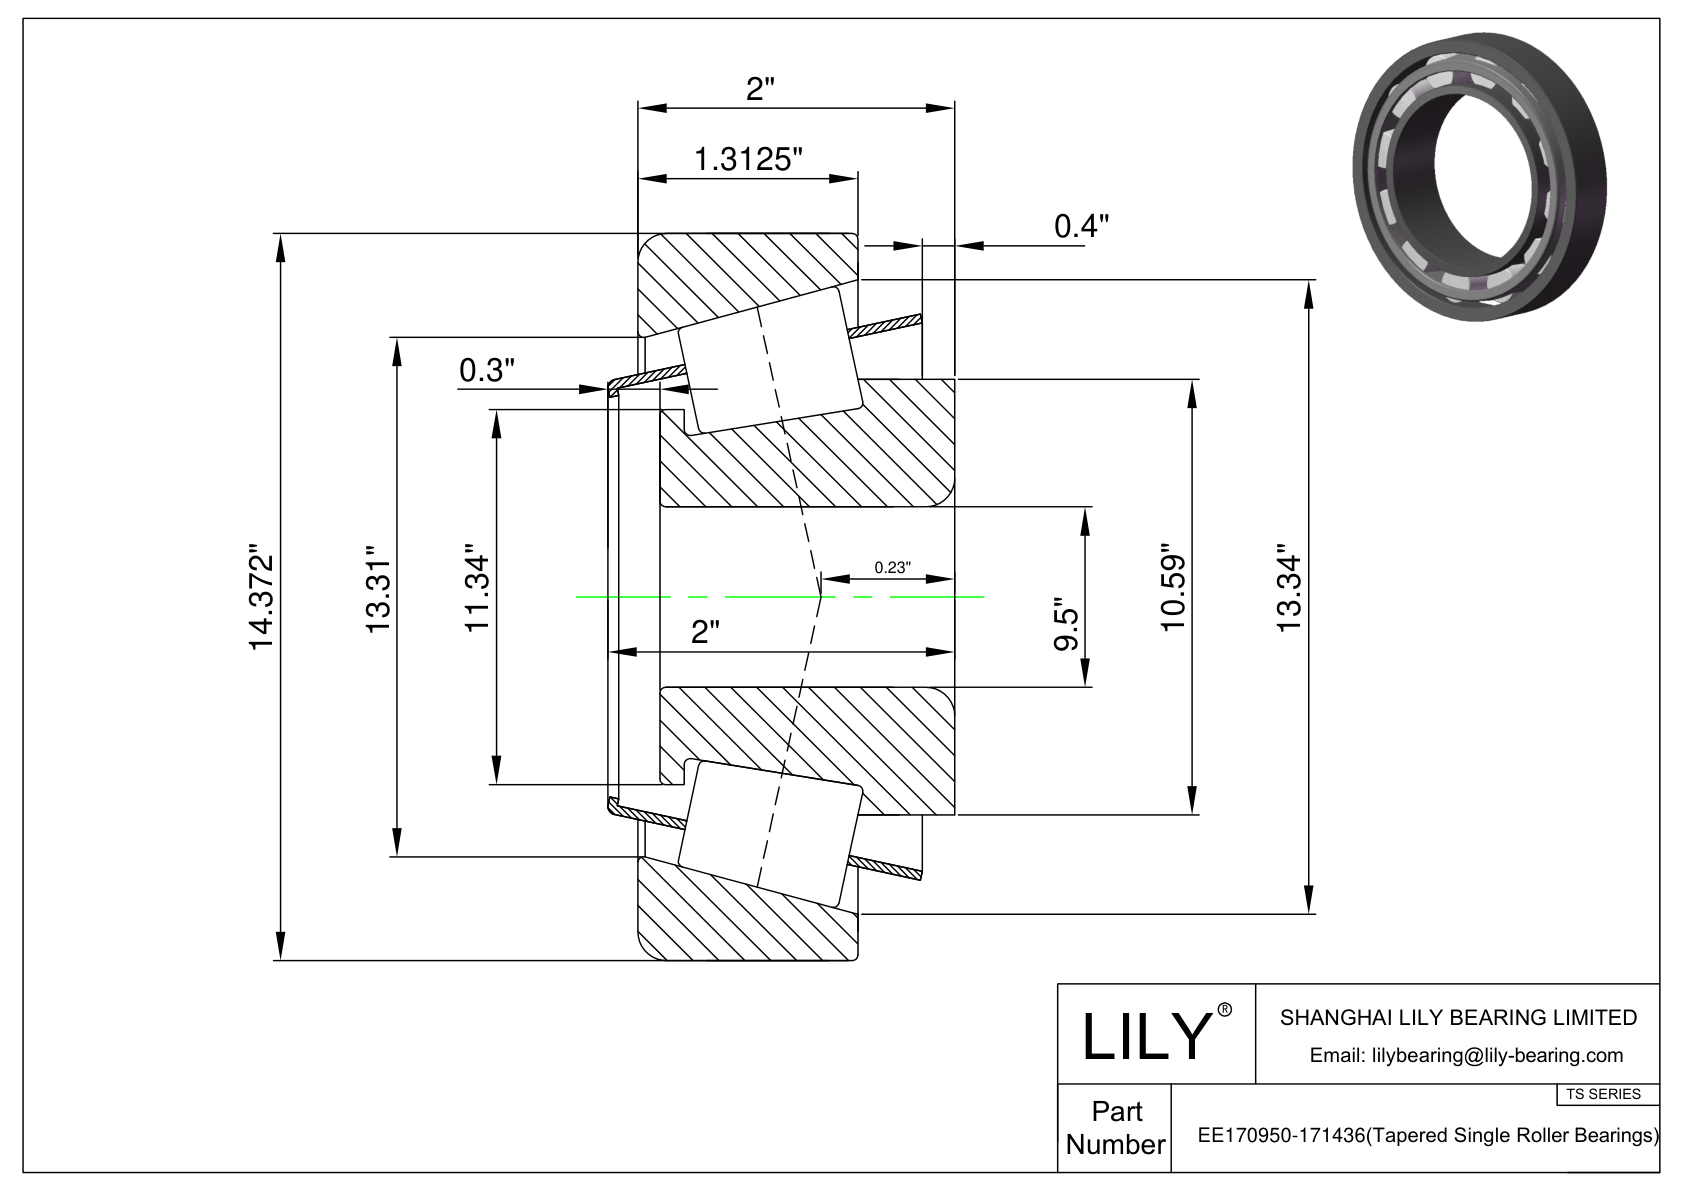 EE170950-171436 TS (Tapered Single Roller Bearings) (Imperial) cad drawing